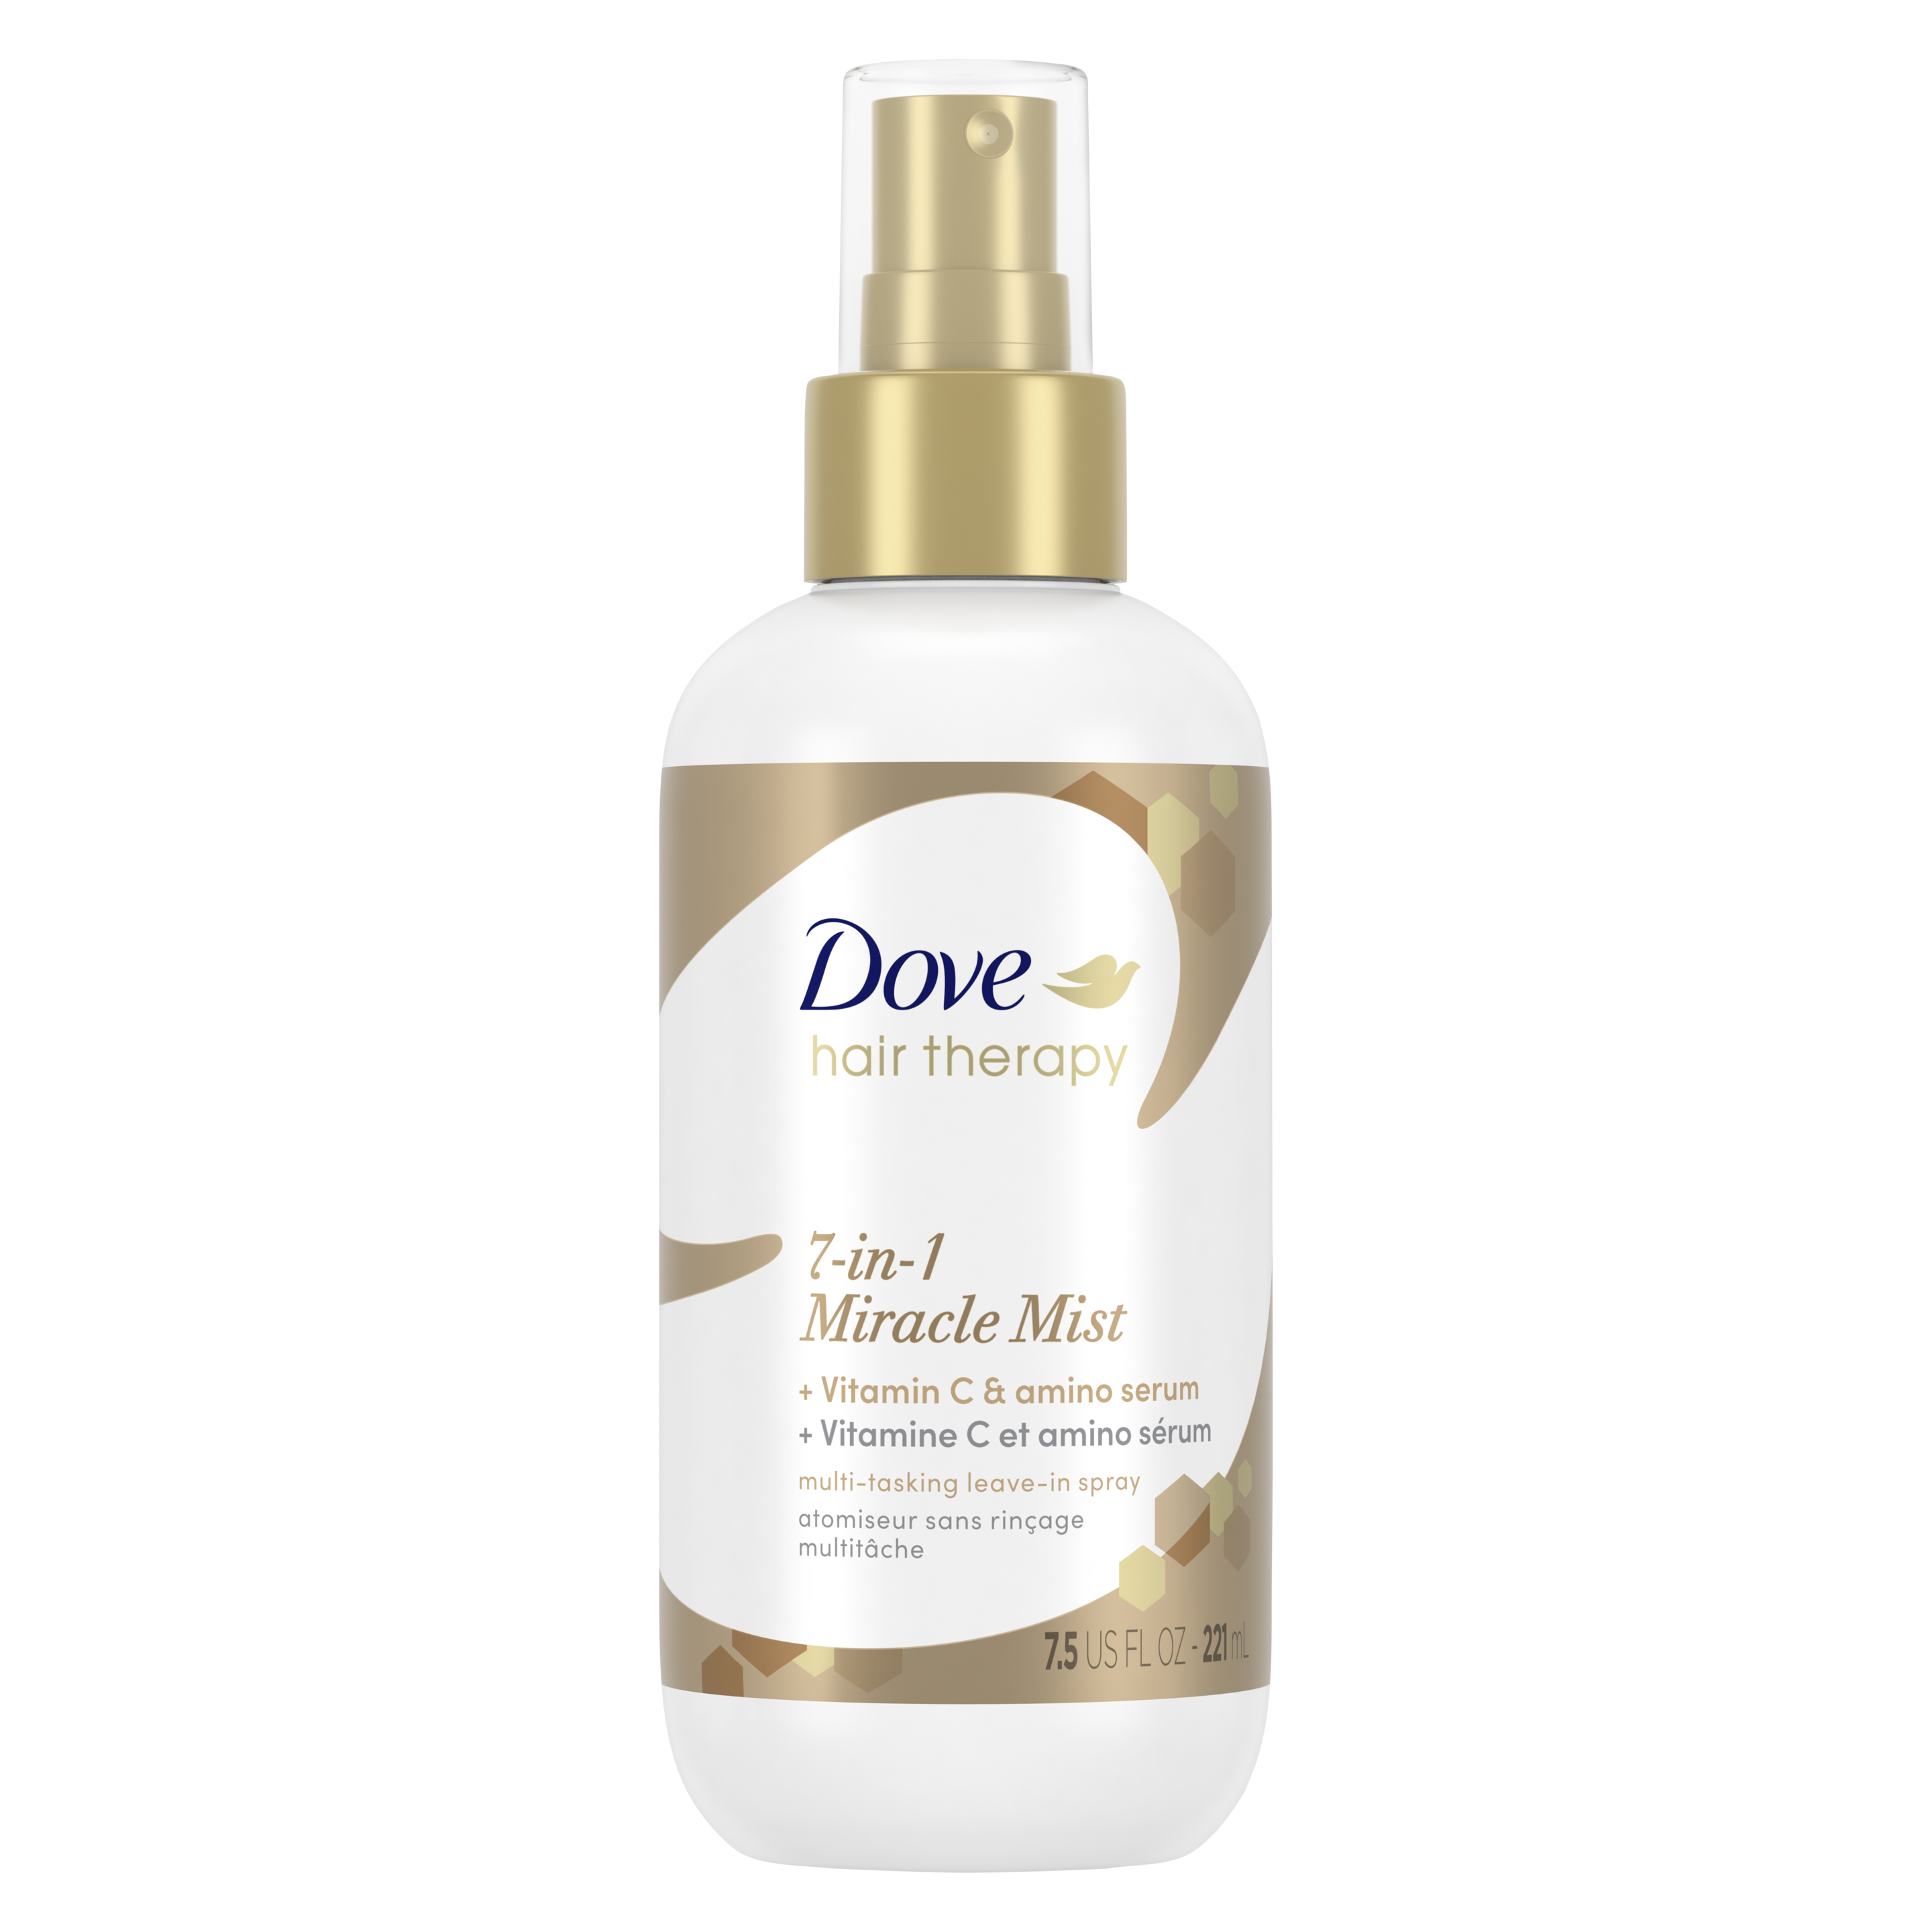 Dove 7-in-1 Miracle Mist 221ml